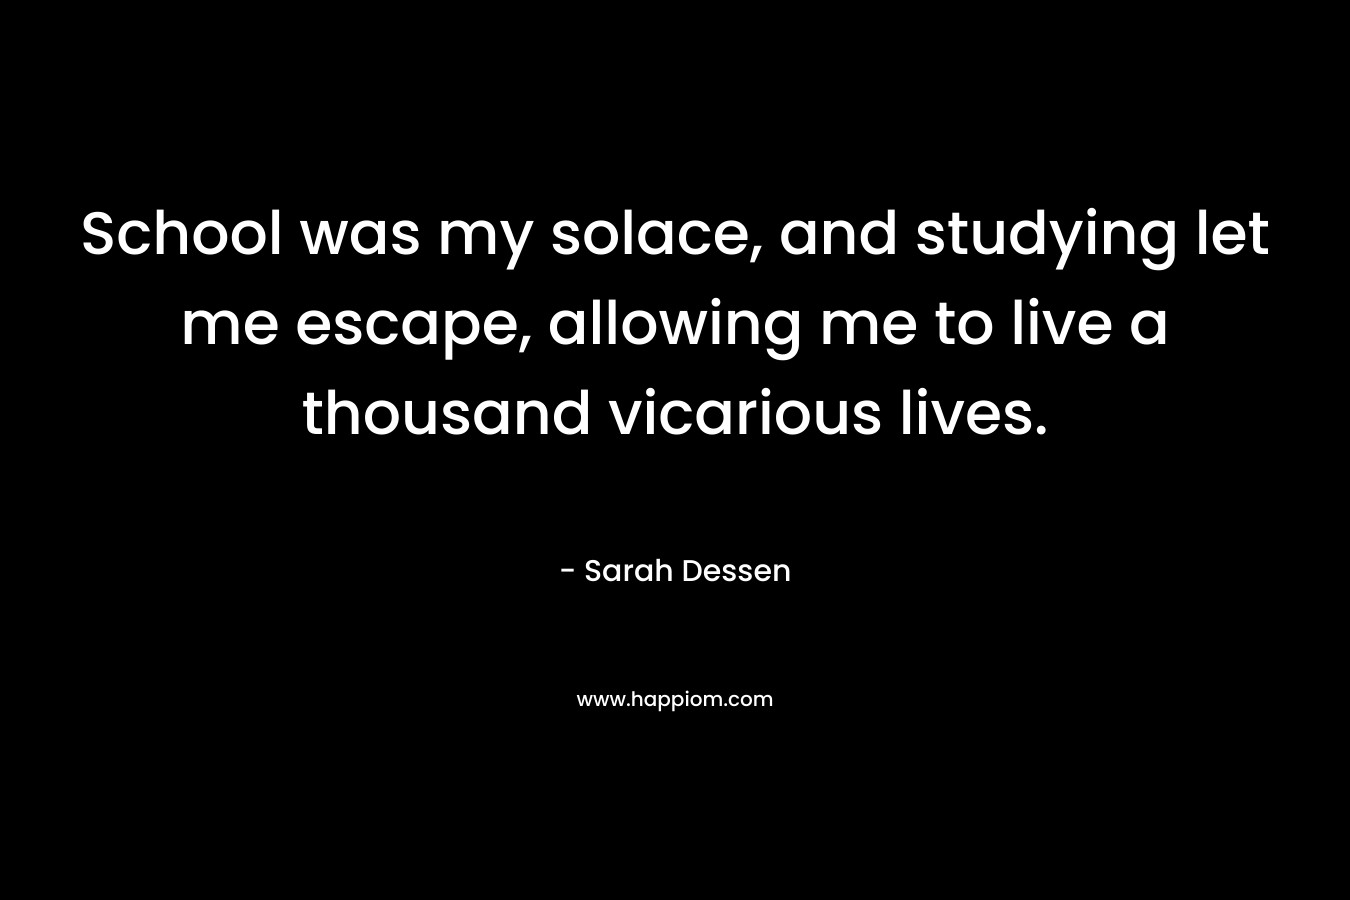 School was my solace, and studying let me escape, allowing me to live a thousand vicarious lives. – Sarah Dessen